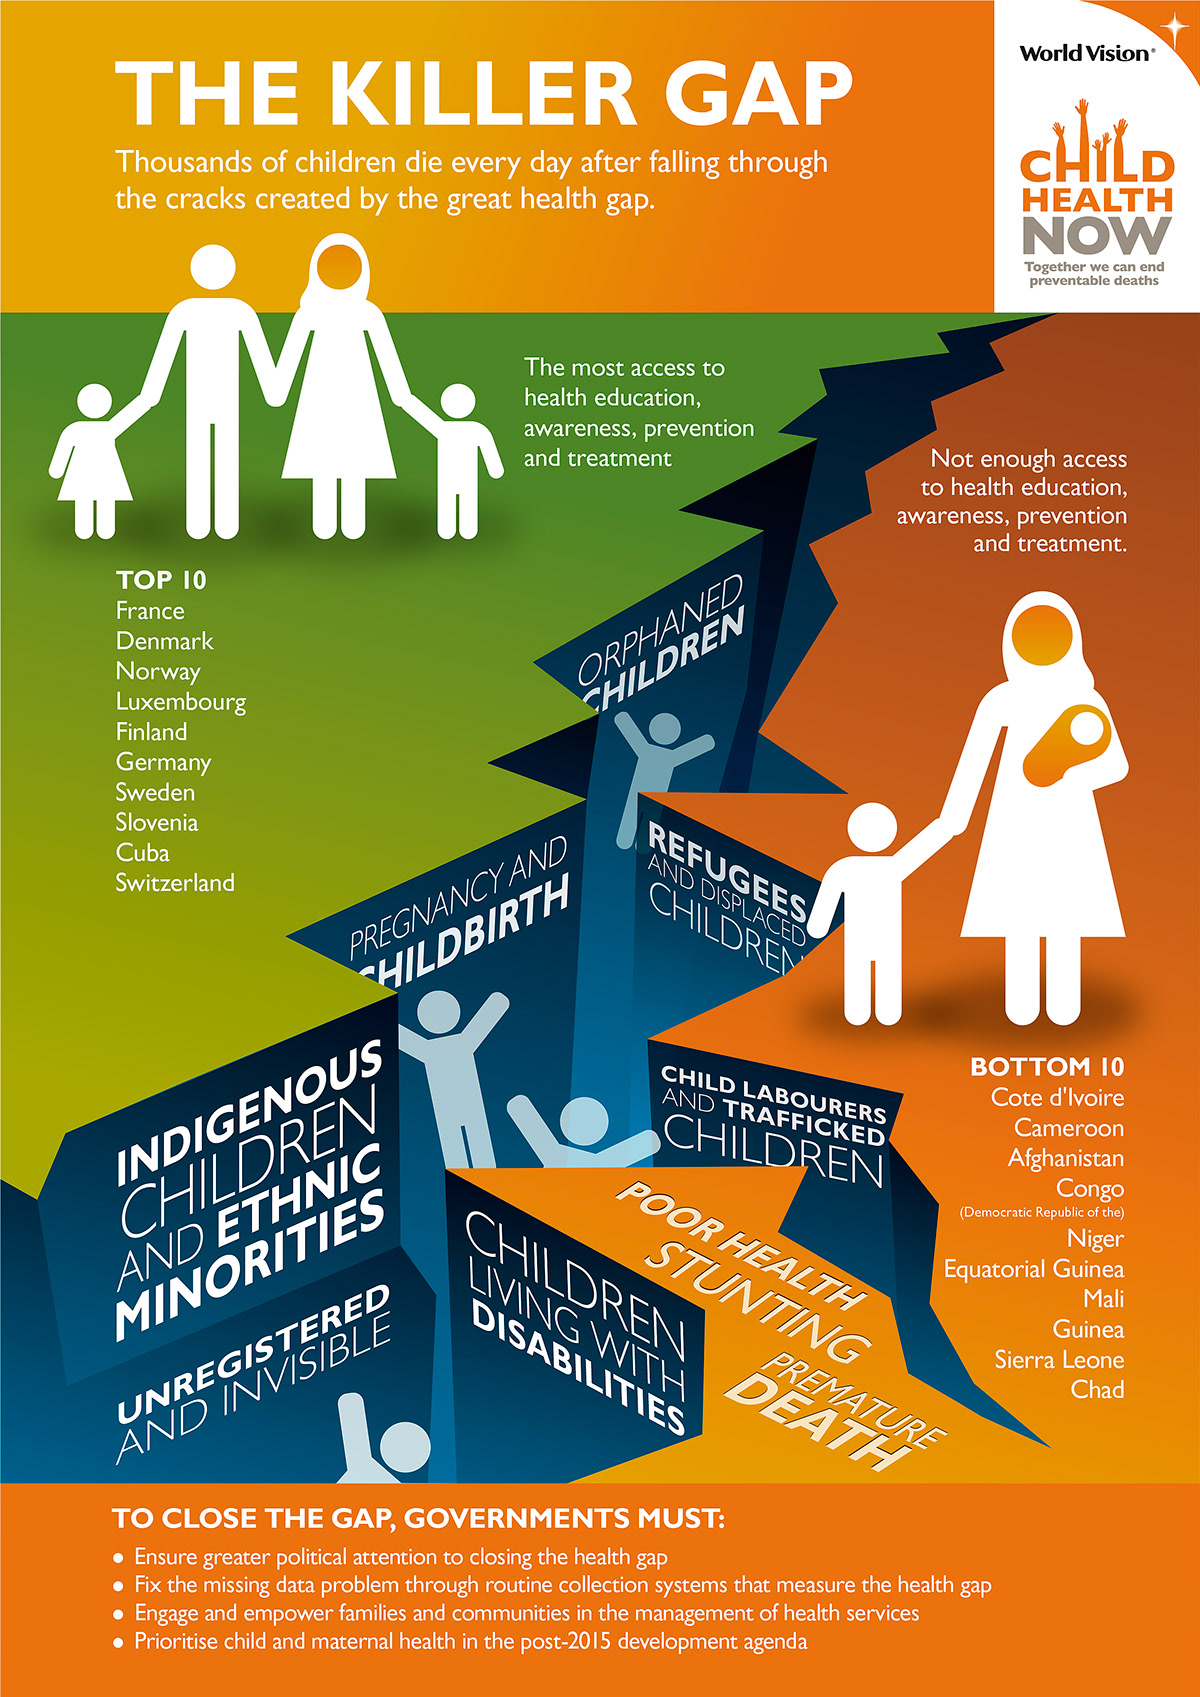 The Killer Gap infographic showing a large ravine of problems separating the poor from the wealthy.